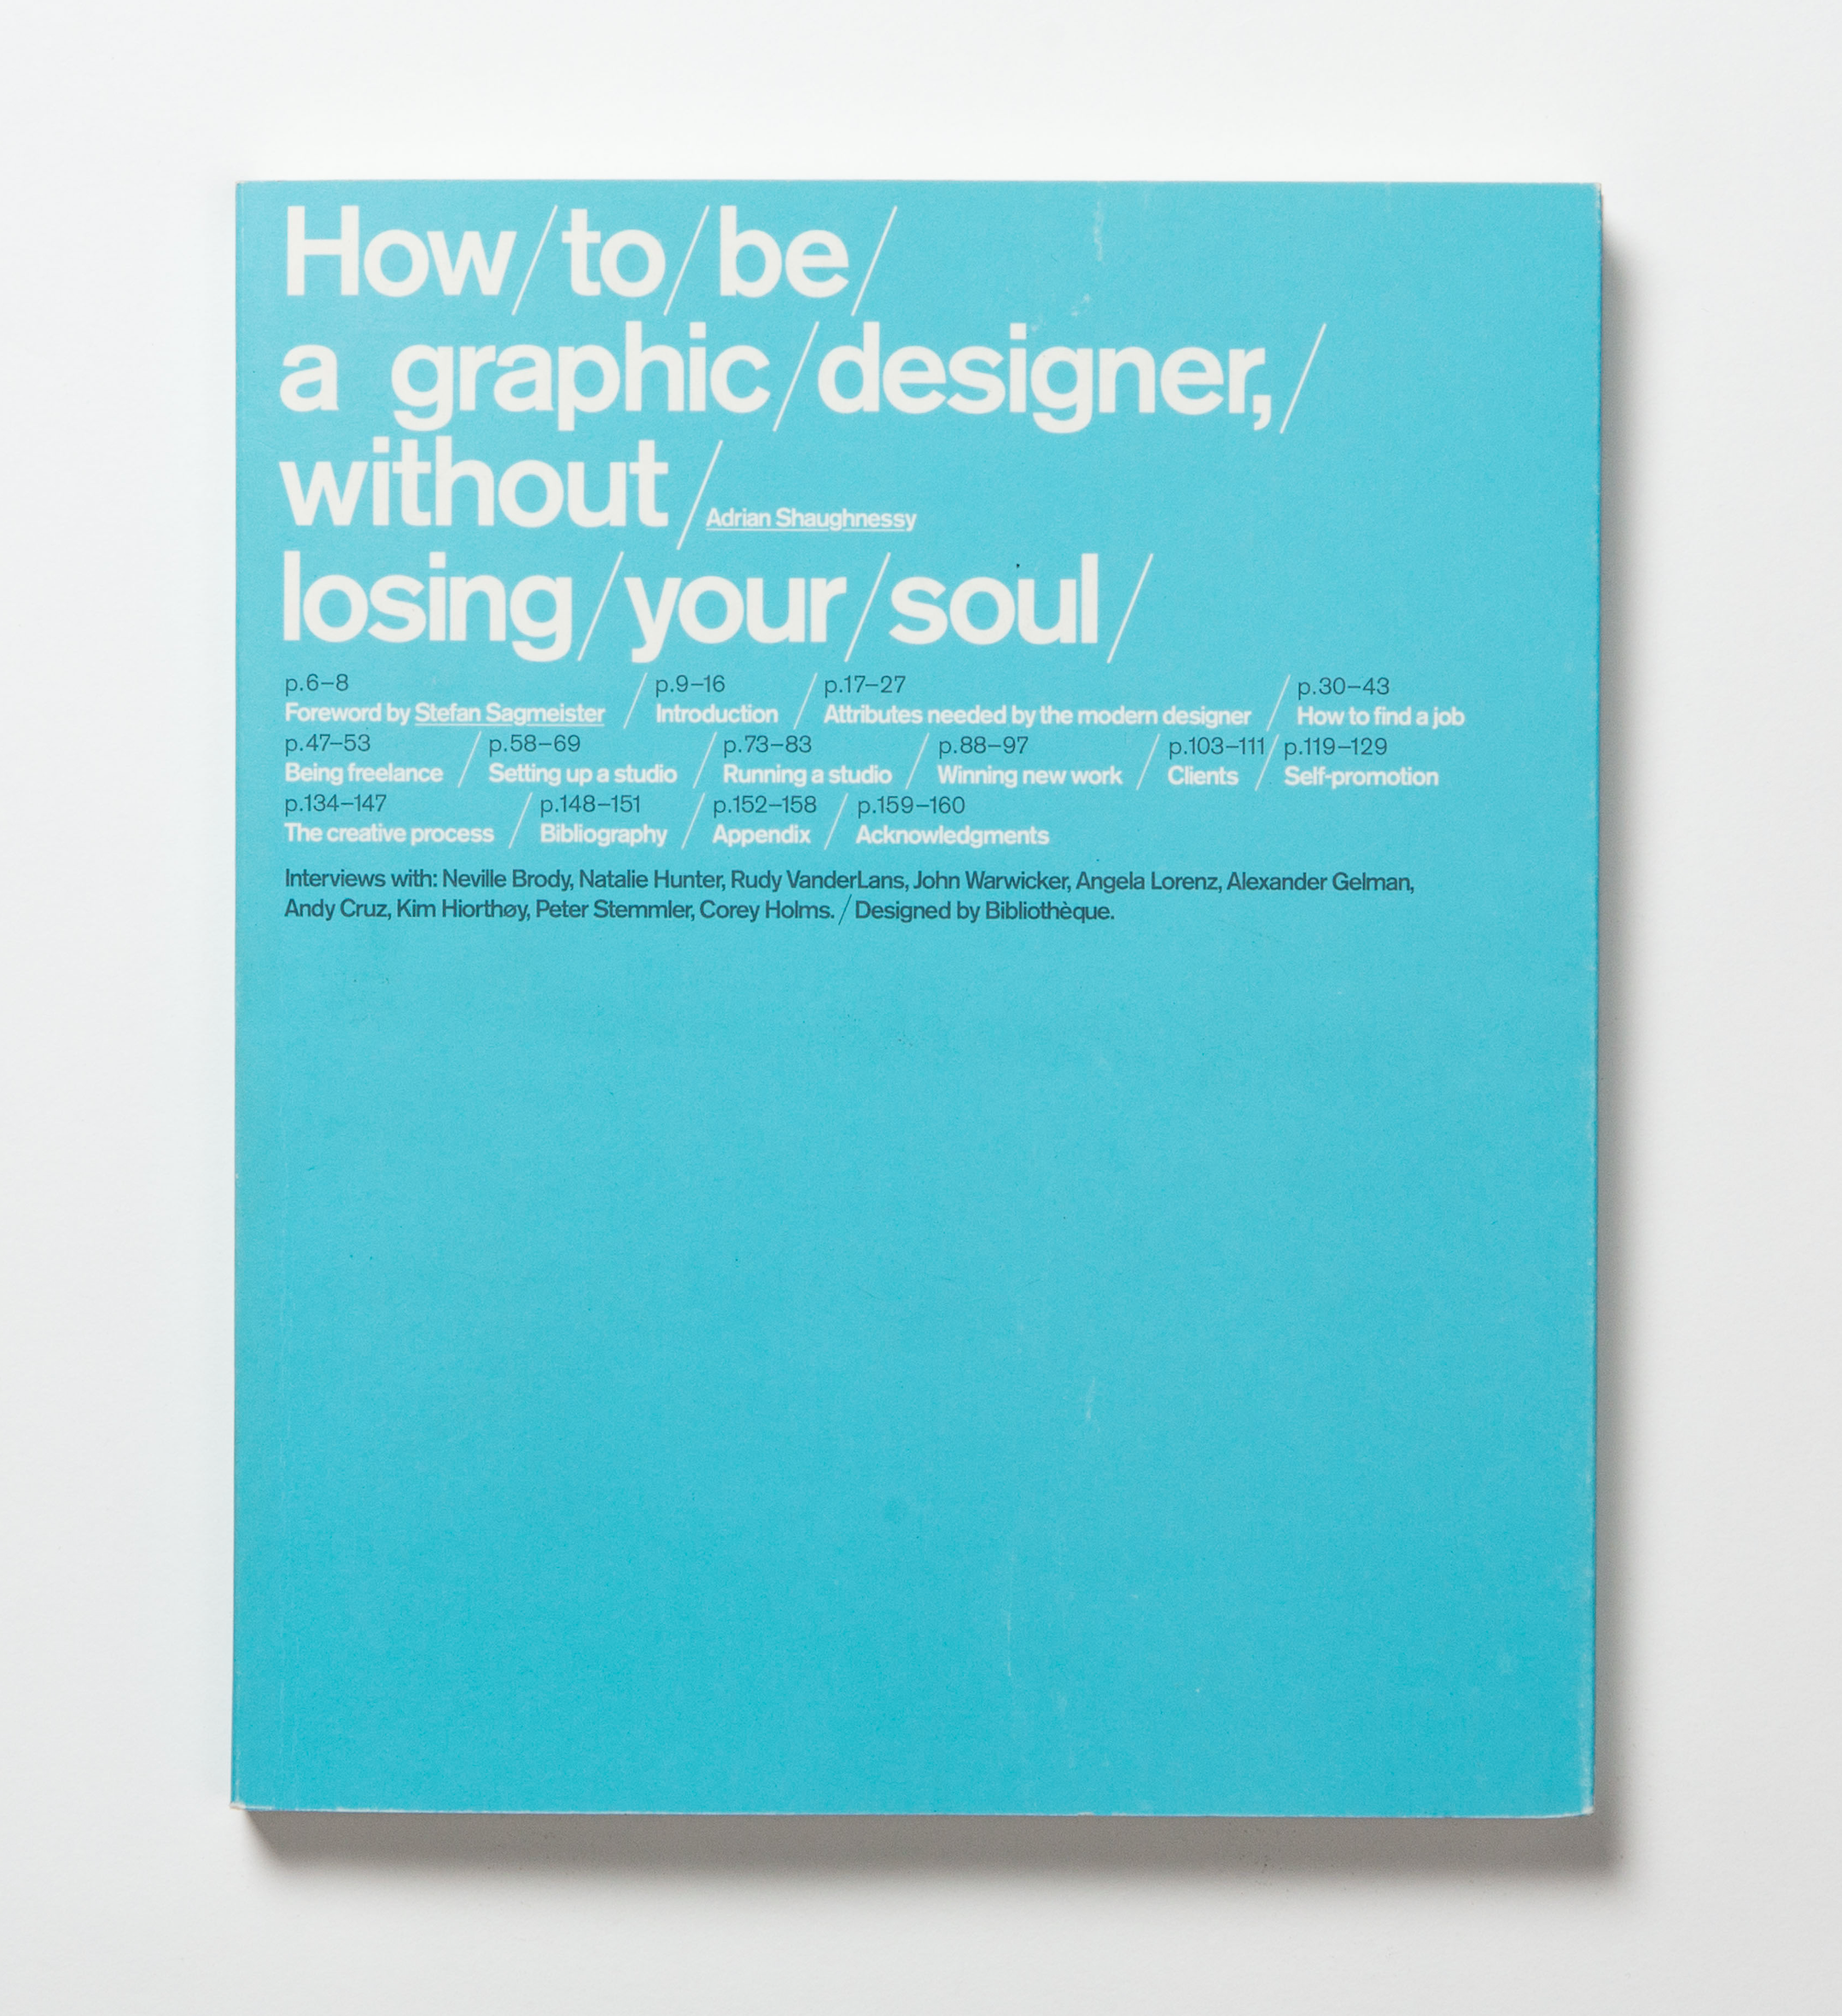 How to be a Graphic Designer, Without Losing Your Soul by Adrian Shaughnessy